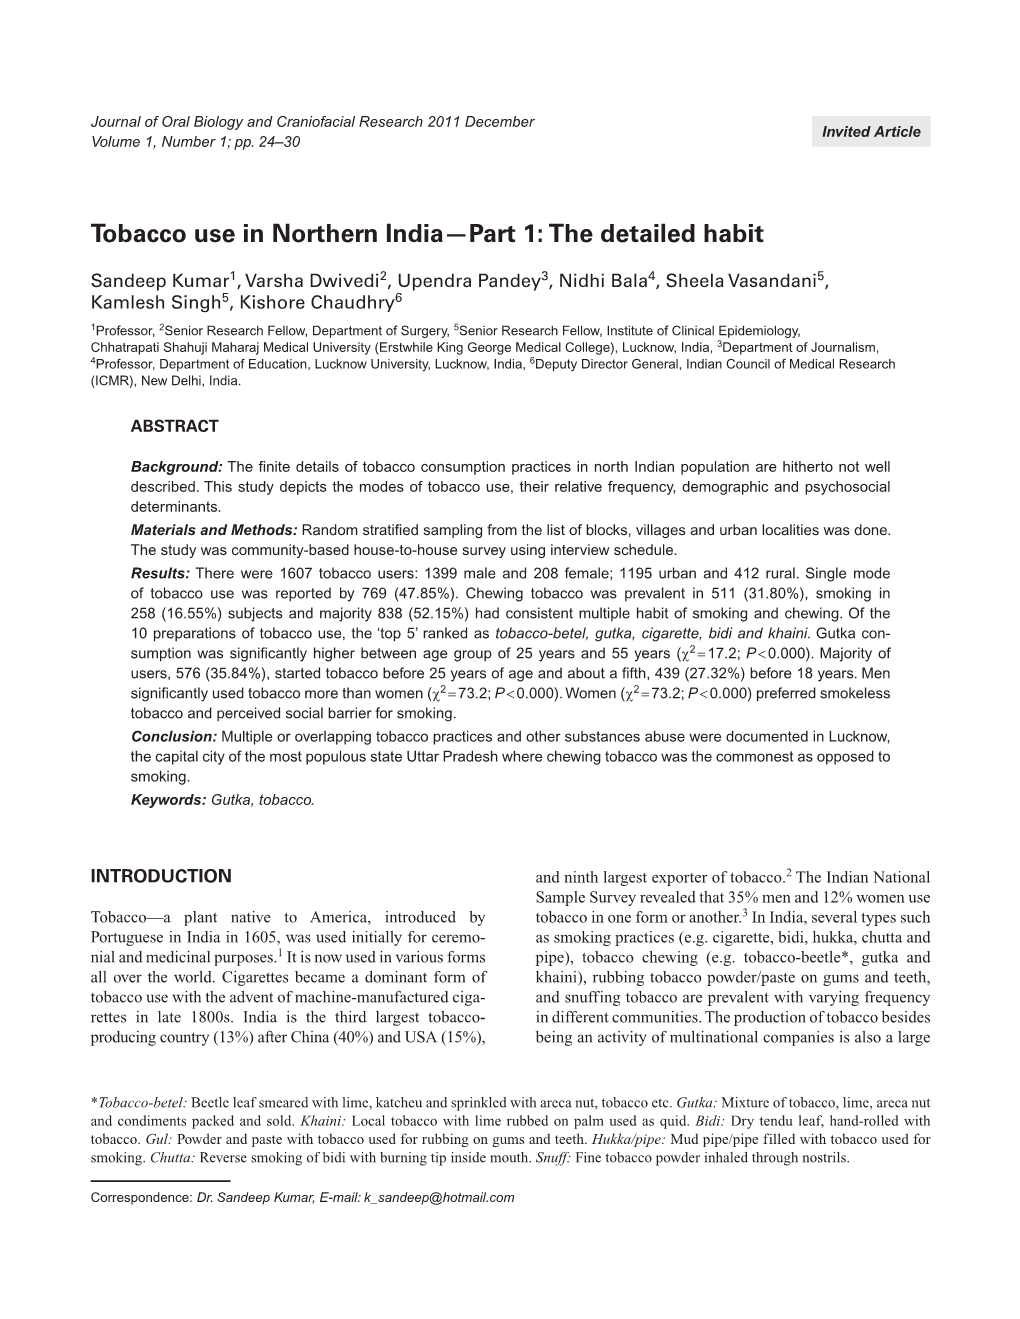 Tobacco Use in Northern Indiaâ€“Part 1: the Detailed Habit